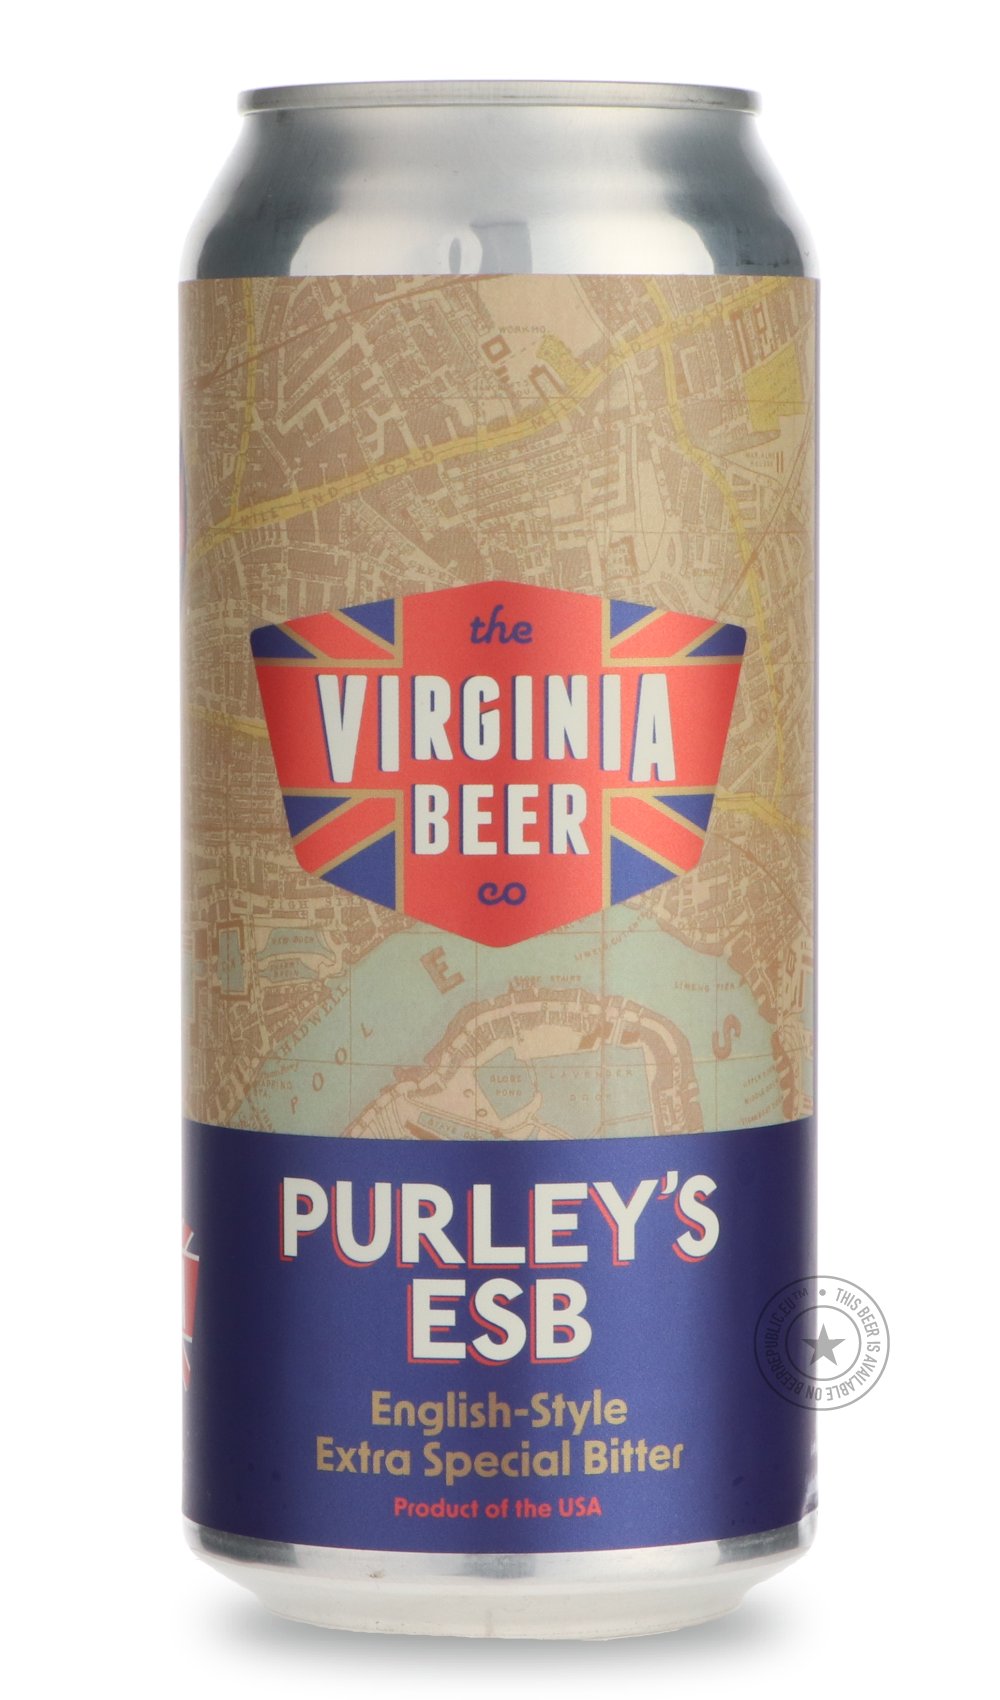 -The Virginia Beer Company- Purley's ESB-Pale- Only @ Beer Republic - The best online beer store for American & Canadian craft beer - Buy beer online from the USA and Canada - Bier online kopen - Amerikaans bier kopen - Craft beer store - Craft beer kopen - Amerikanisch bier kaufen - Bier online kaufen - Acheter biere online - IPA - Stout - Porter - New England IPA - Hazy IPA - Imperial Stout - Barrel Aged - Barrel Aged Imperial Stout - Brown - Dark beer - Blond - Blonde - Pilsner - Lager - Wheat - Weizen -